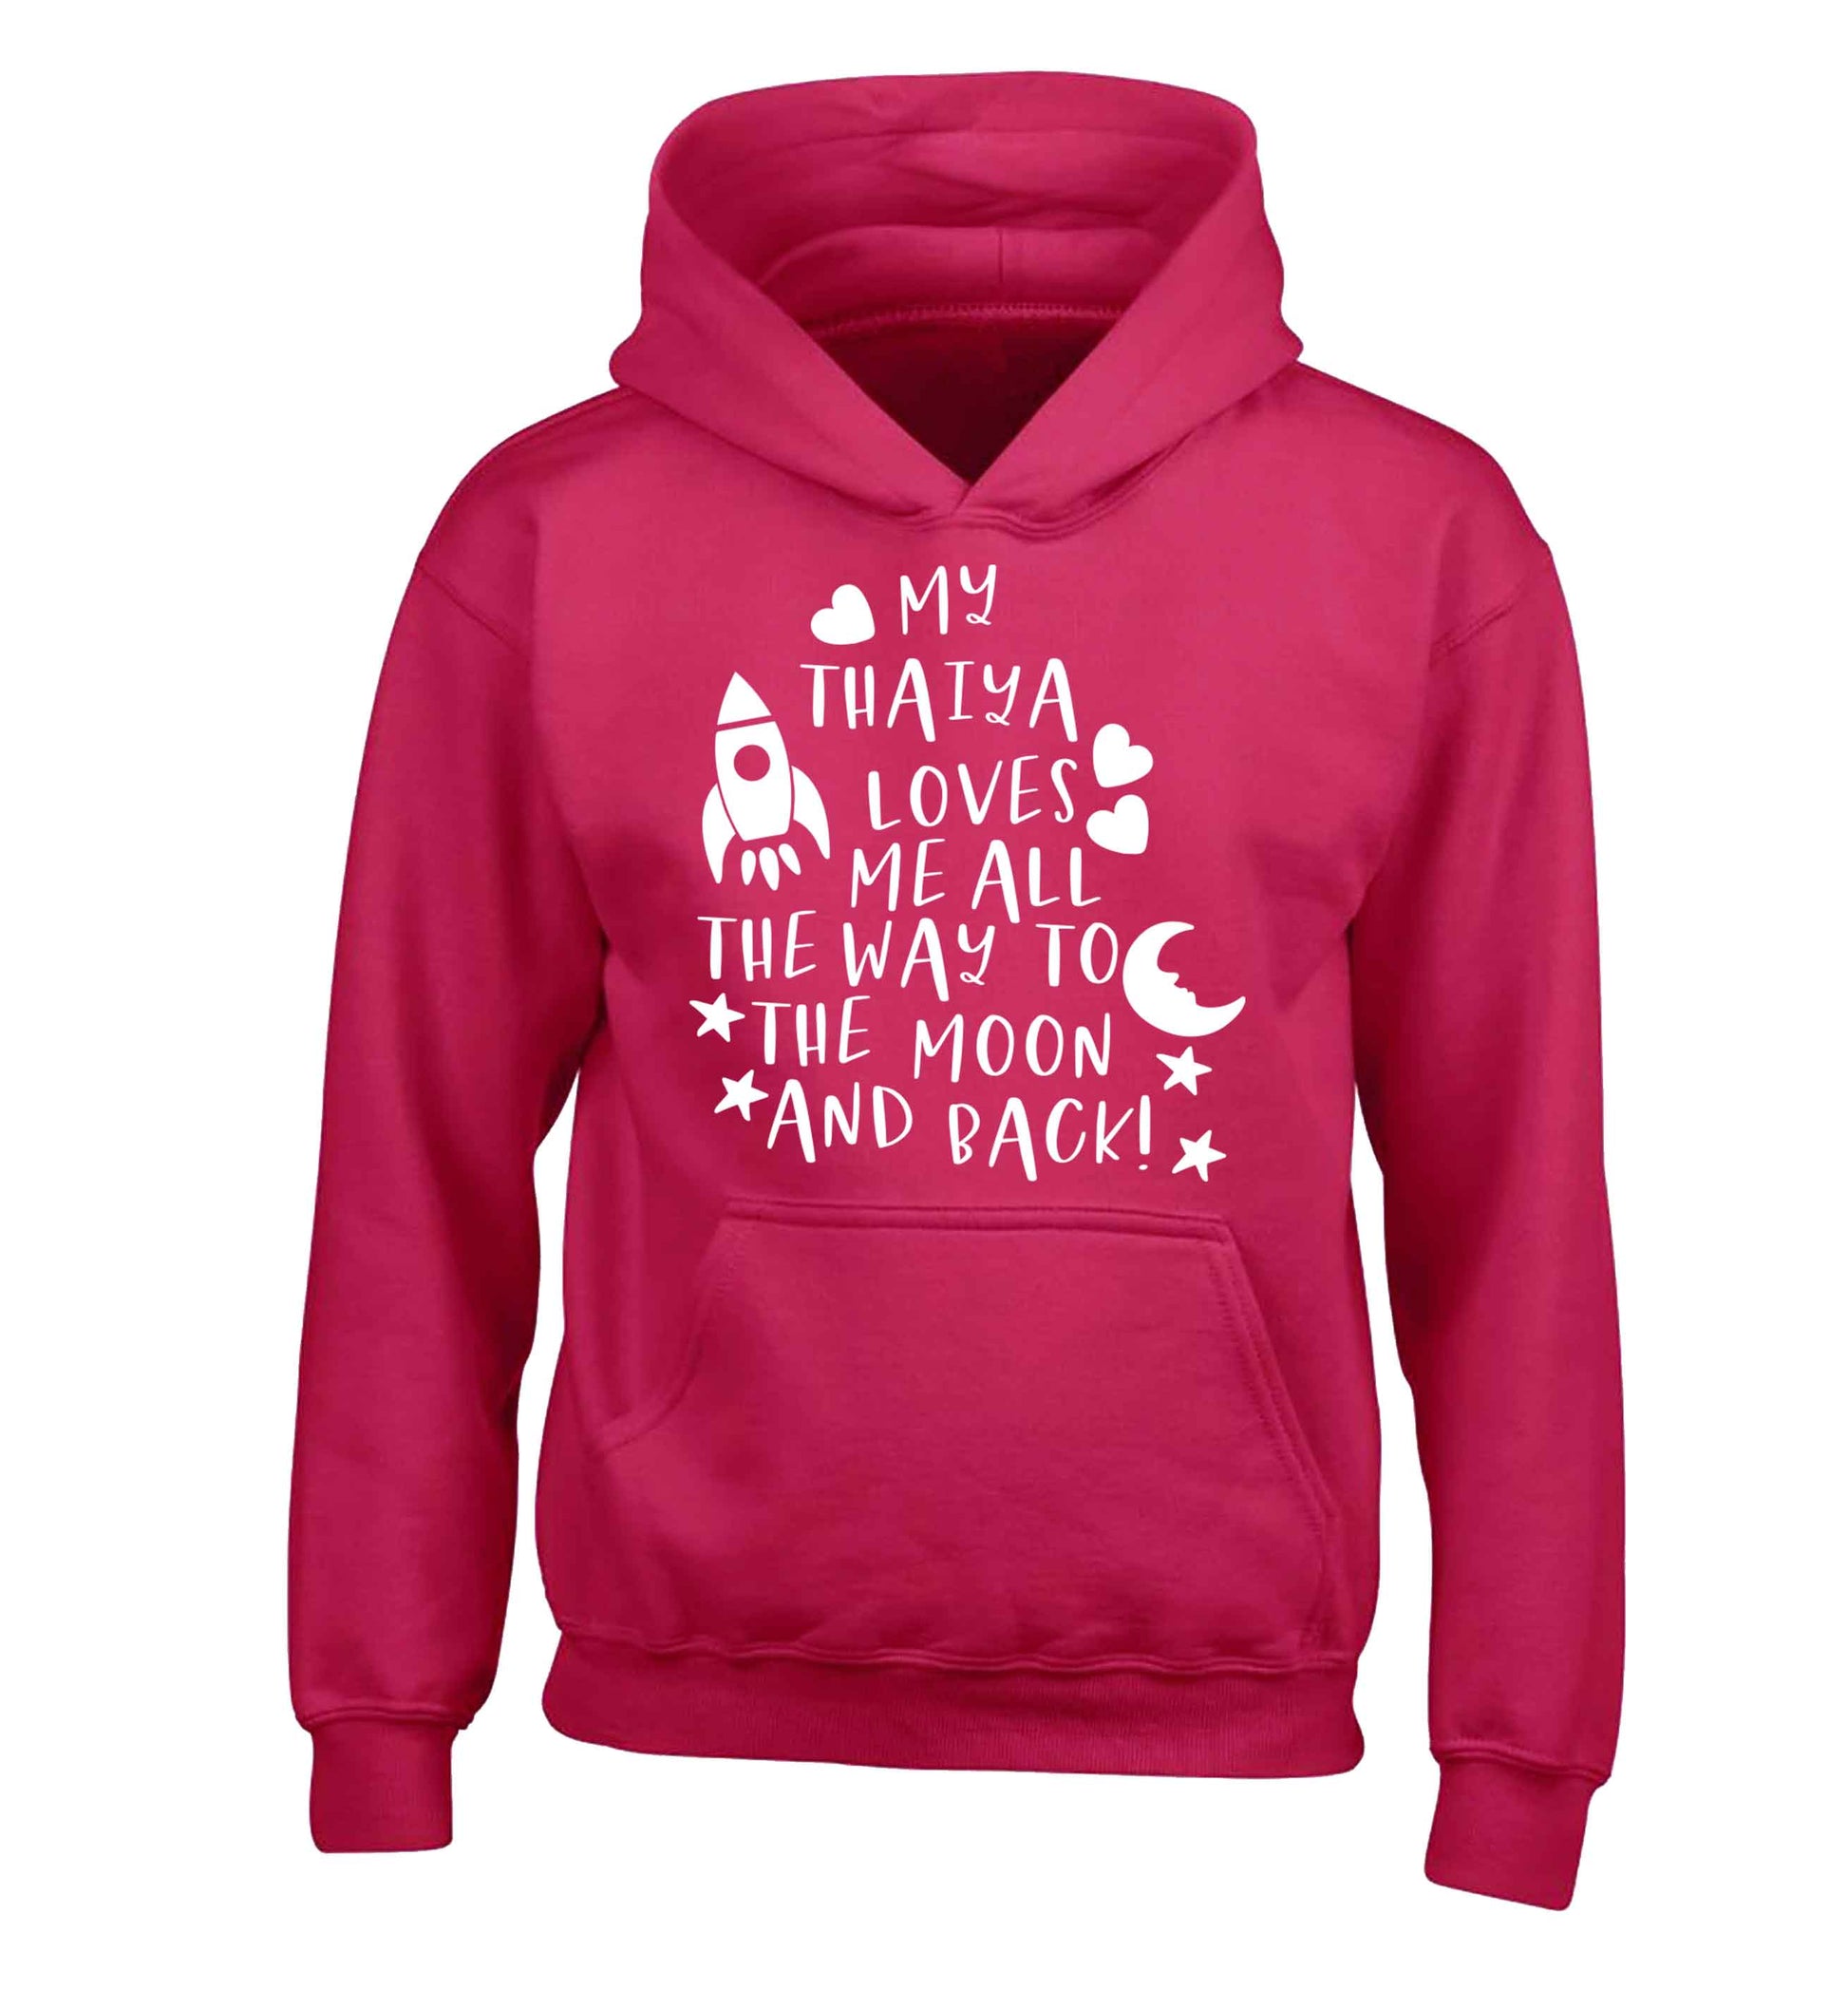 My thaiya loves me all the way to the moon and back children's pink hoodie 12-13 Years